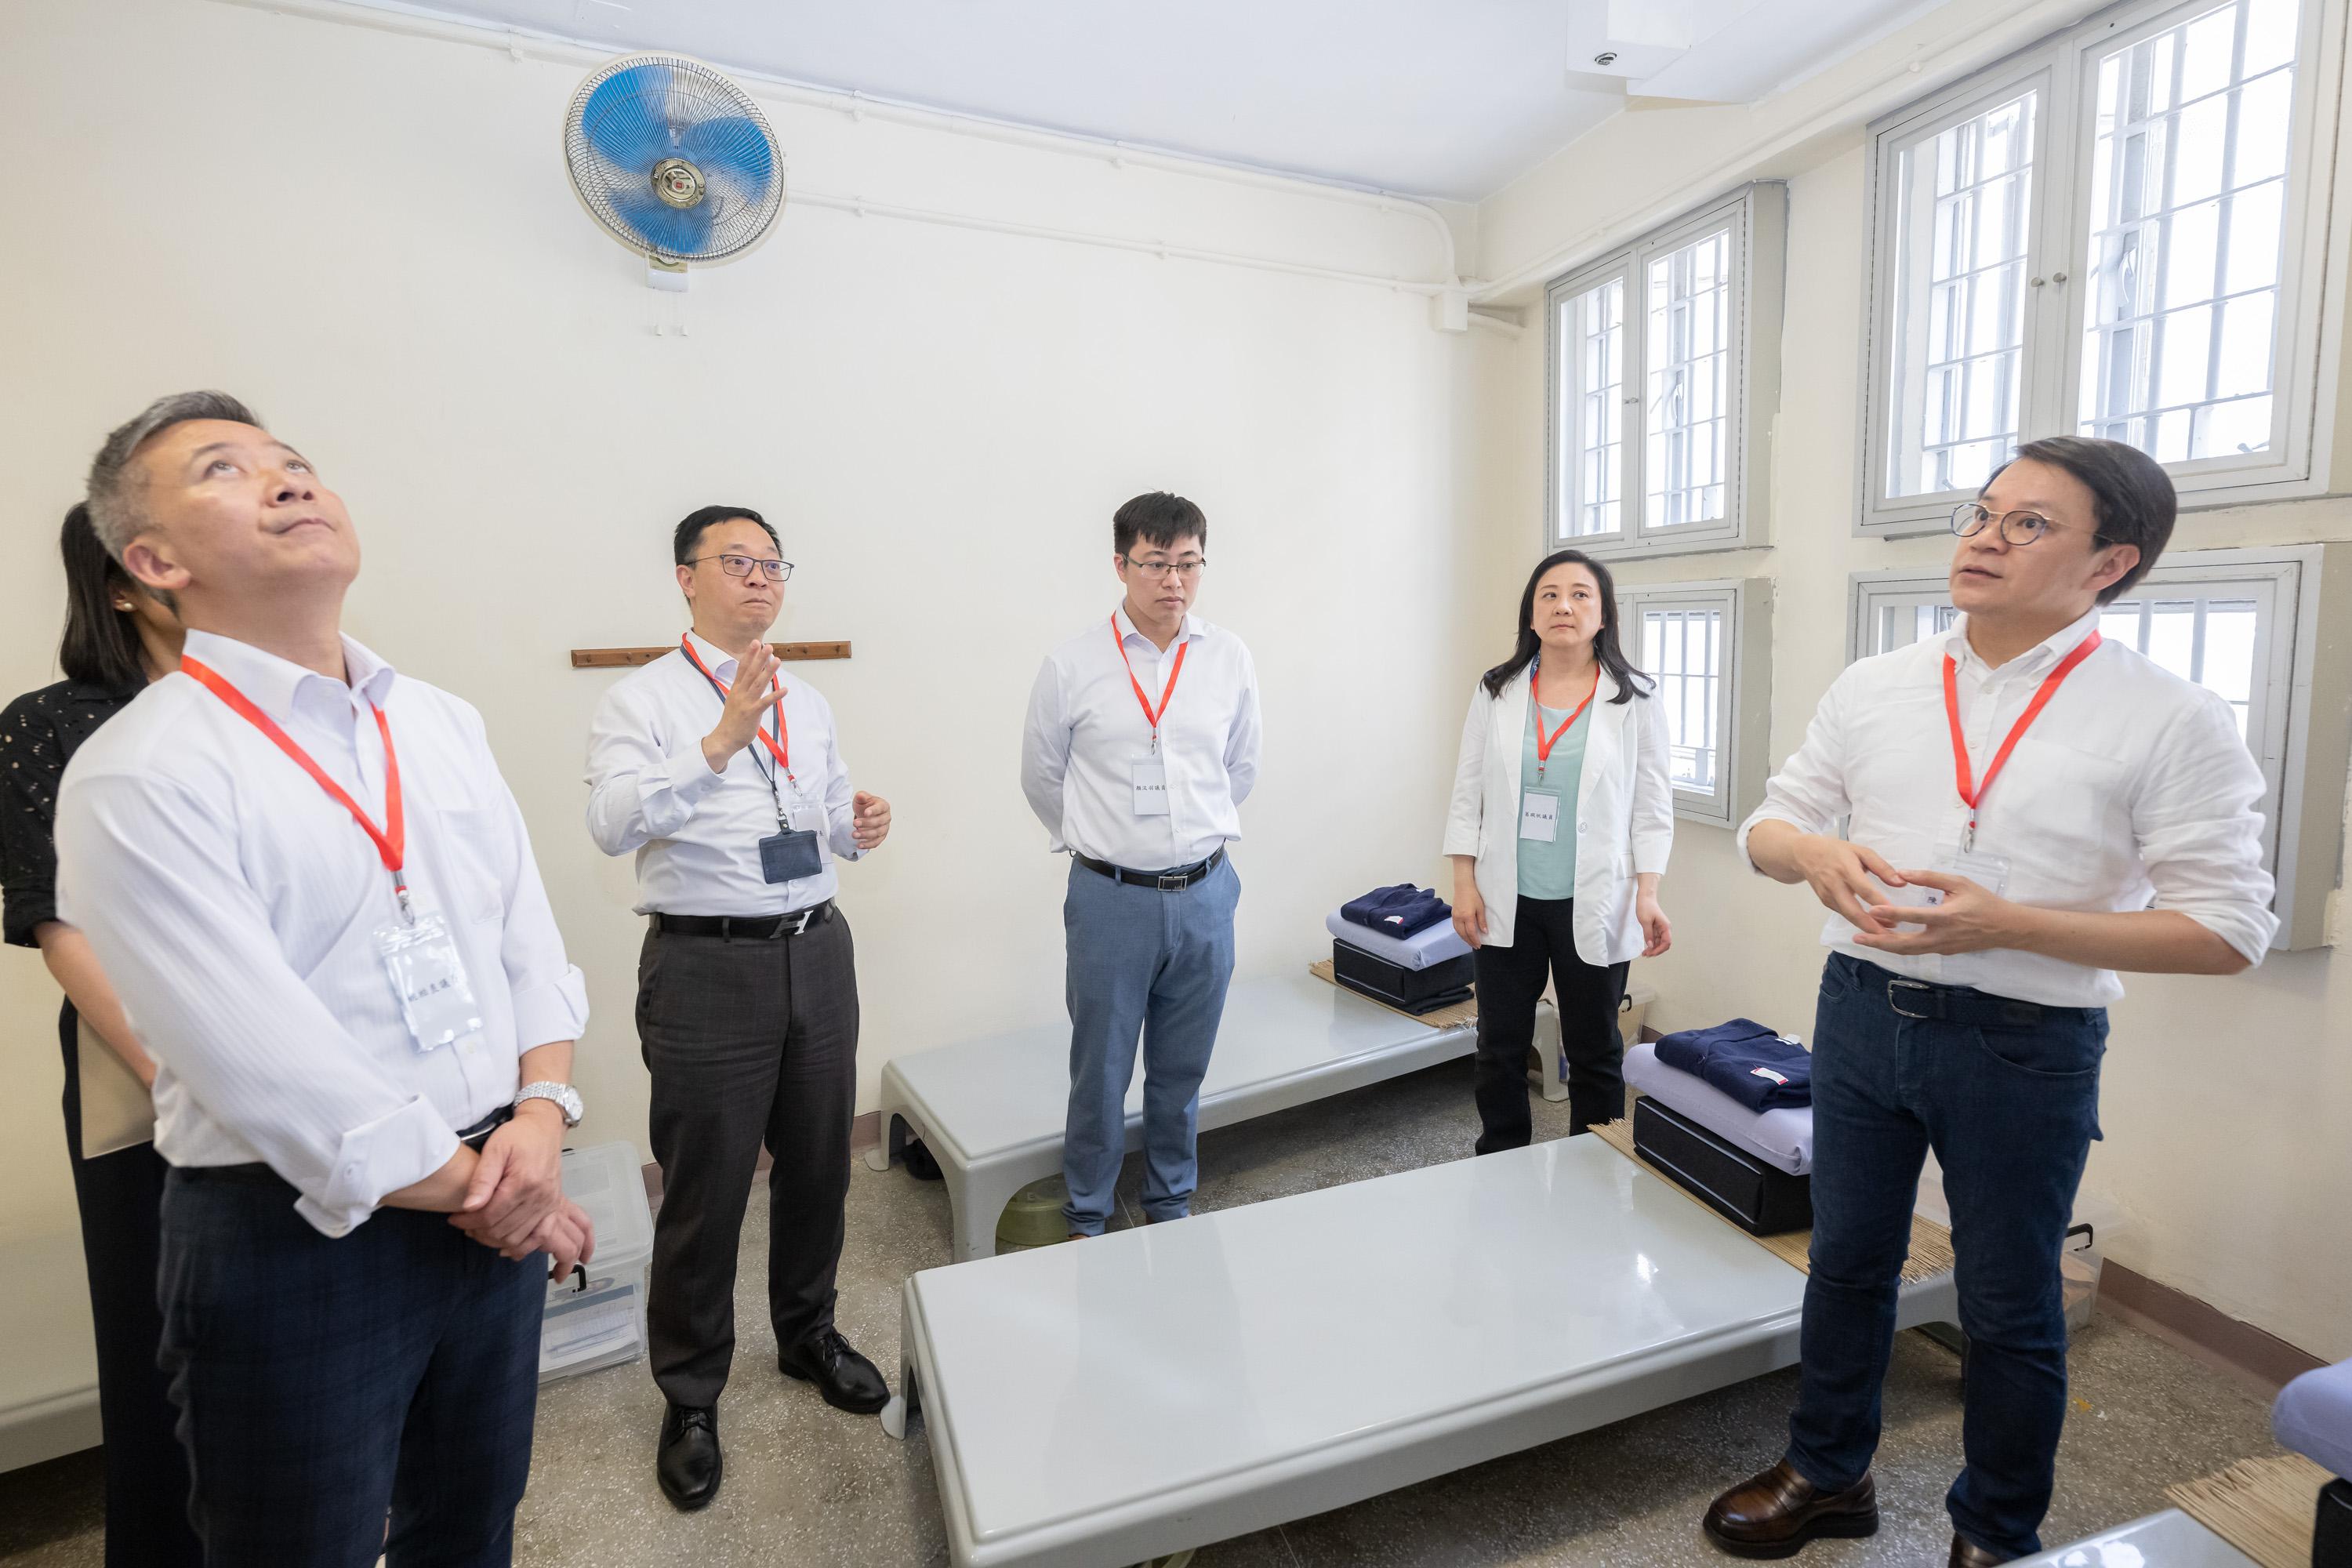 The Legislative Council (LegCo) Panel on Security visits five correctional facilities today (June 2). Photo shows LegCo Members visiting a prison dormitory in Lai King Correctional Institution.